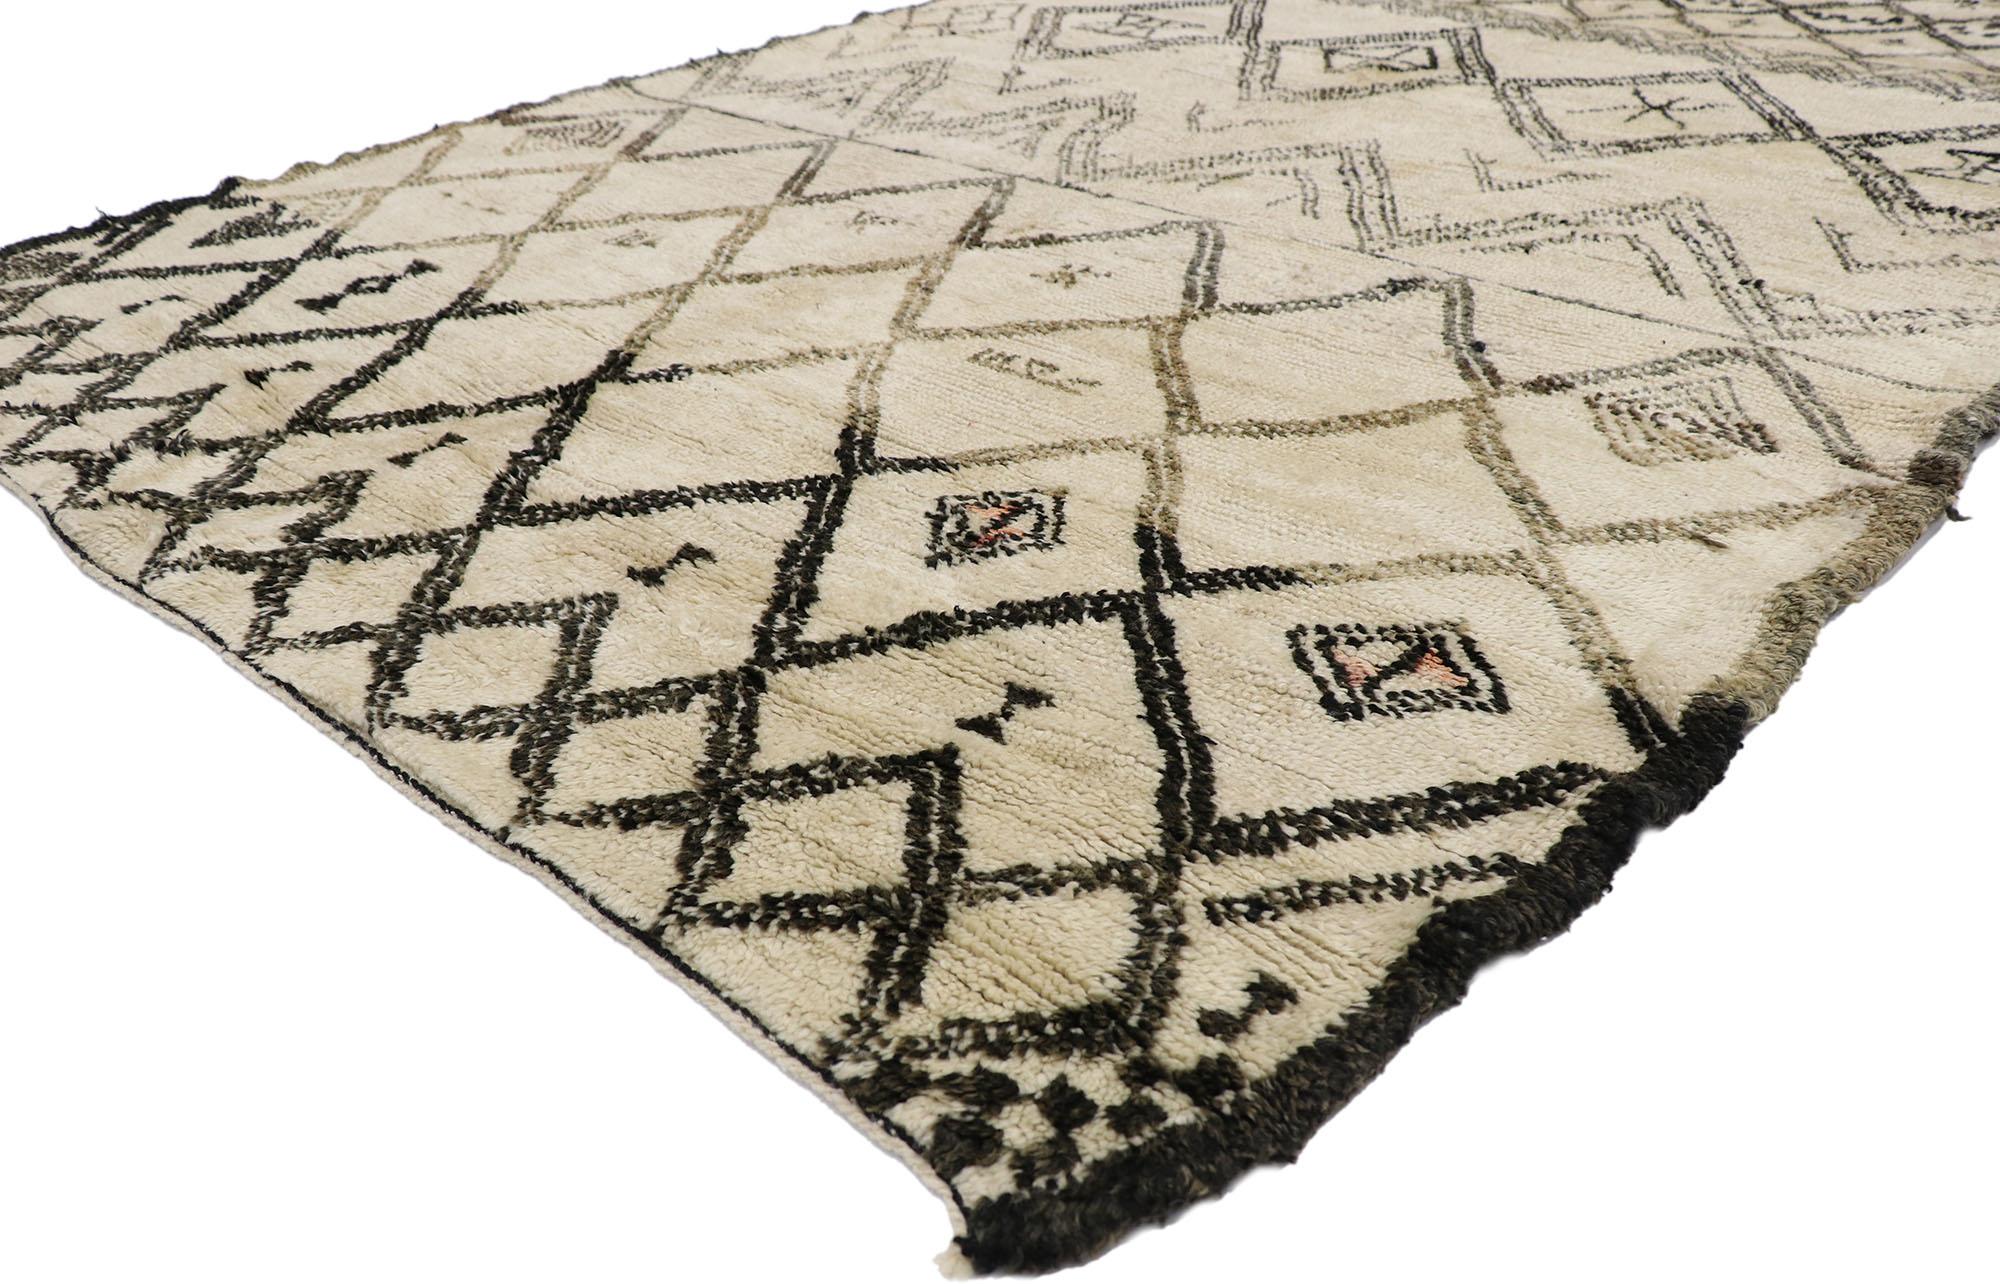 21370 Vintage Berber Moroccan Beni Ourain Rug, 06'04 x 09'09.
With its simplicity, plush pile and tribal style, this hand knotted wool vintage Berber Beni Ourain Moroccan rug is a captivating vision of woven beauty. It features variations of a